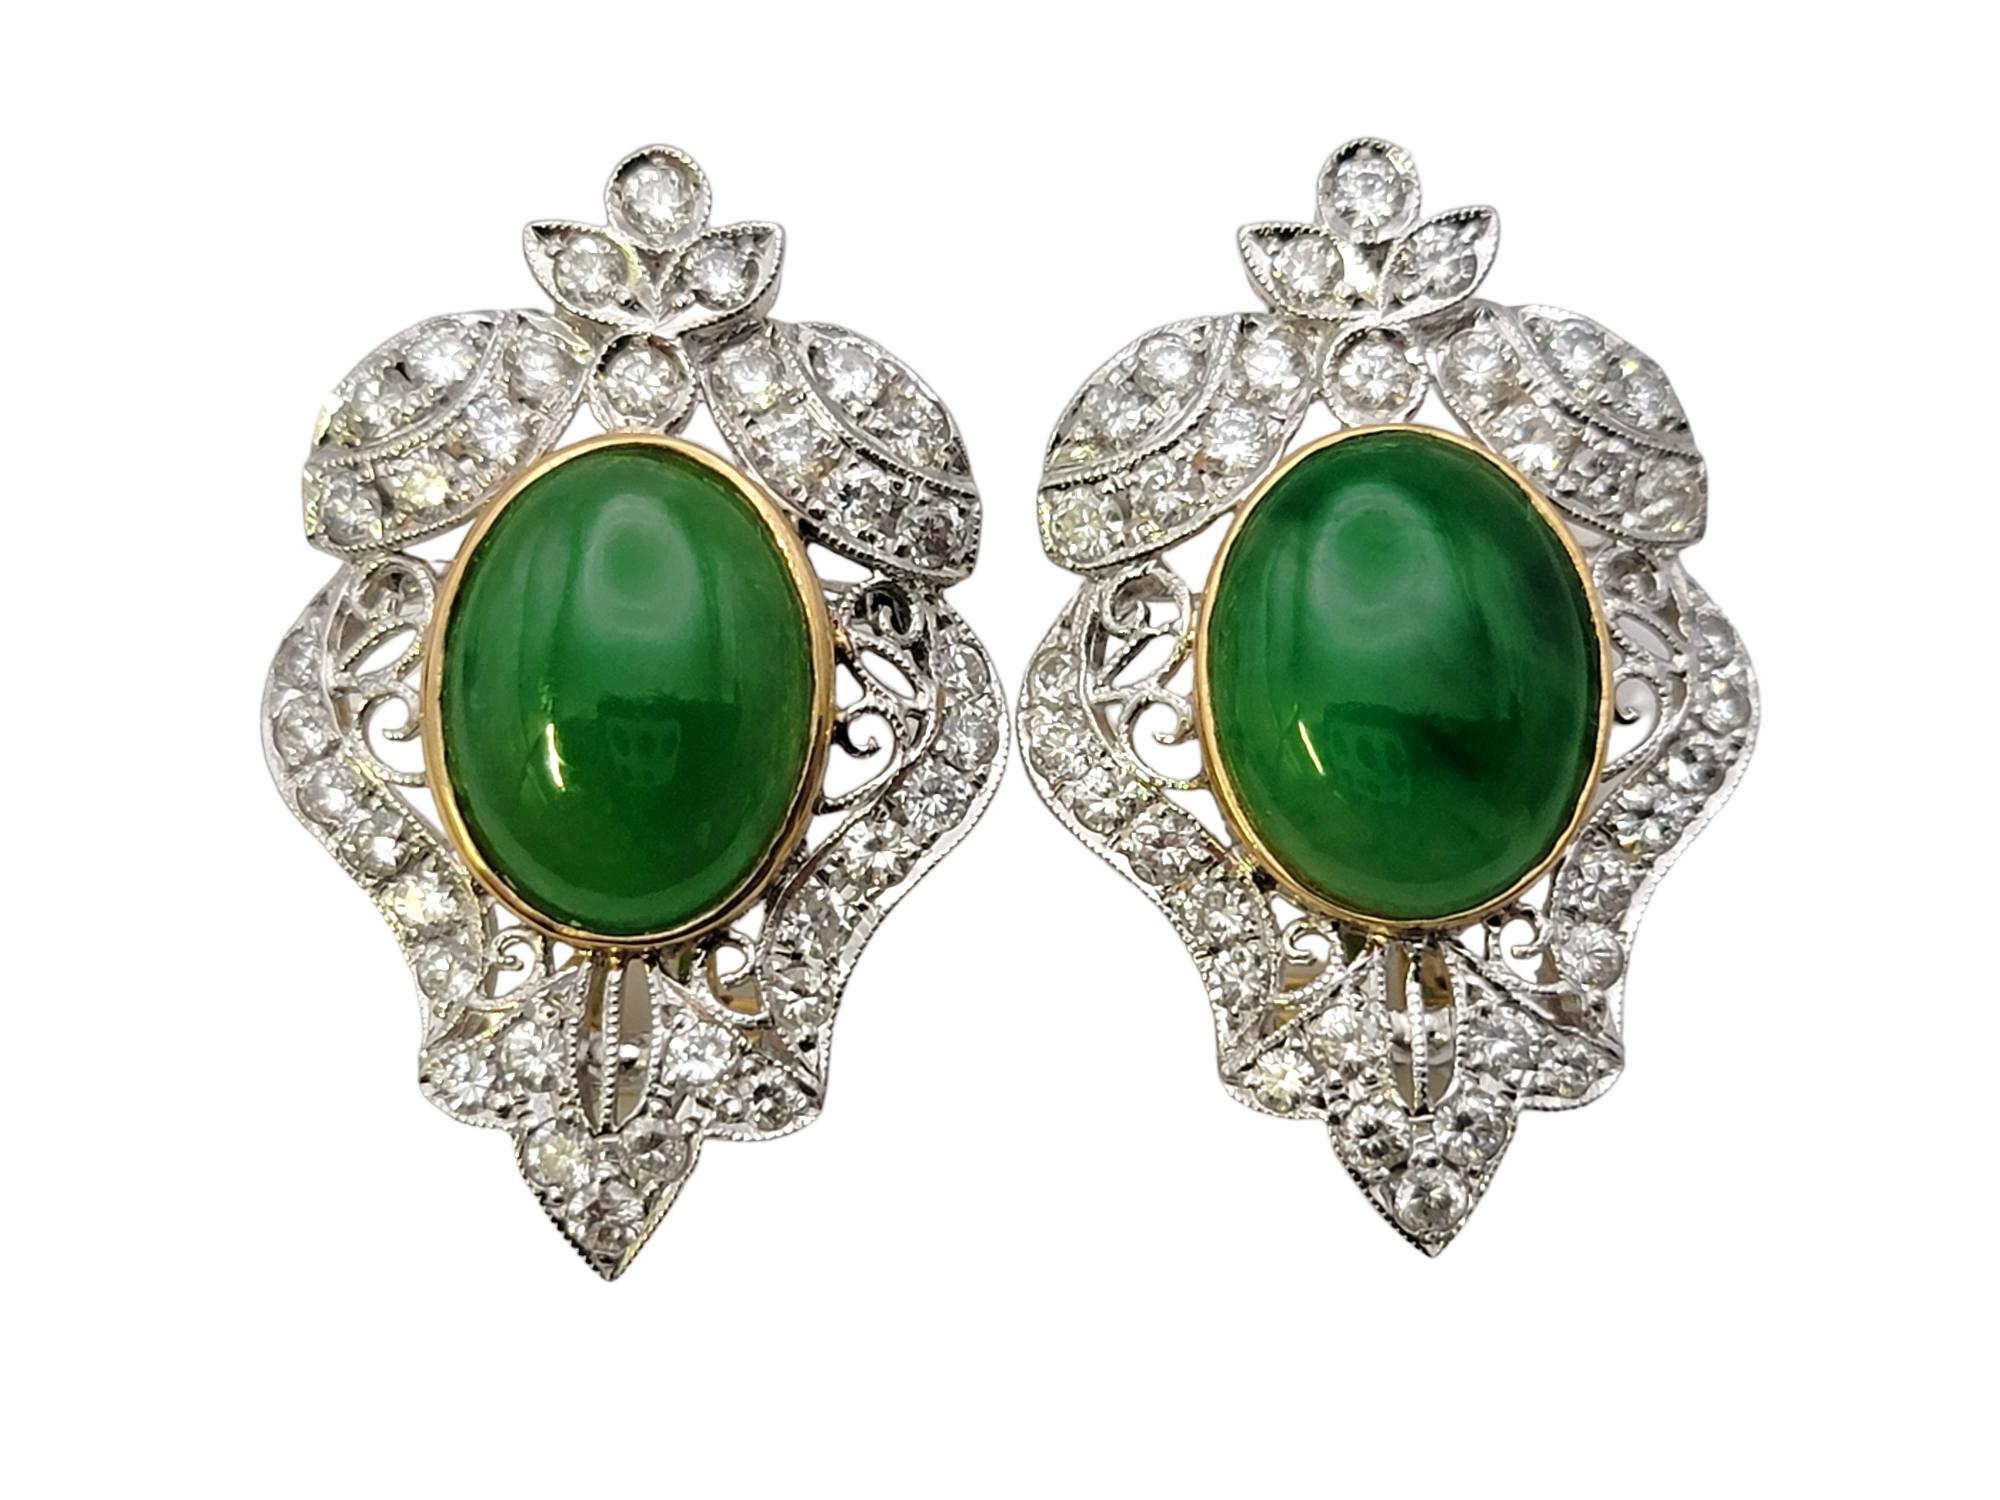 Vintage Style Cabochon Jade and Pave Diamond Pierced Earrings in 18 Karat Gold For Sale 3